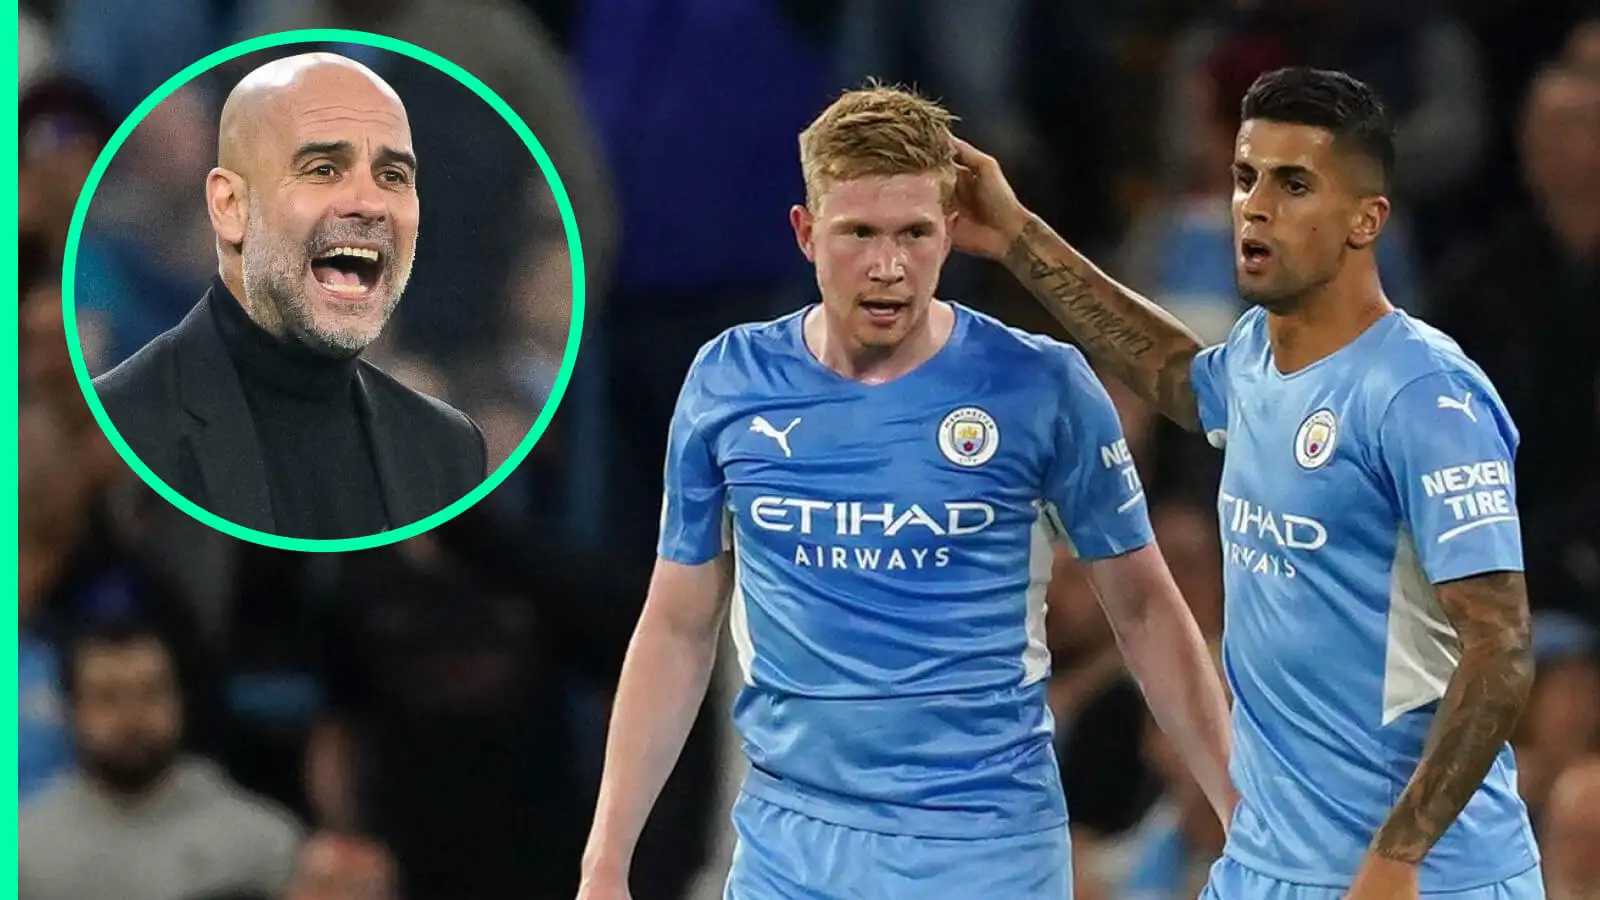 Man City superstar Guardiola is sick of confirms he wants out, as